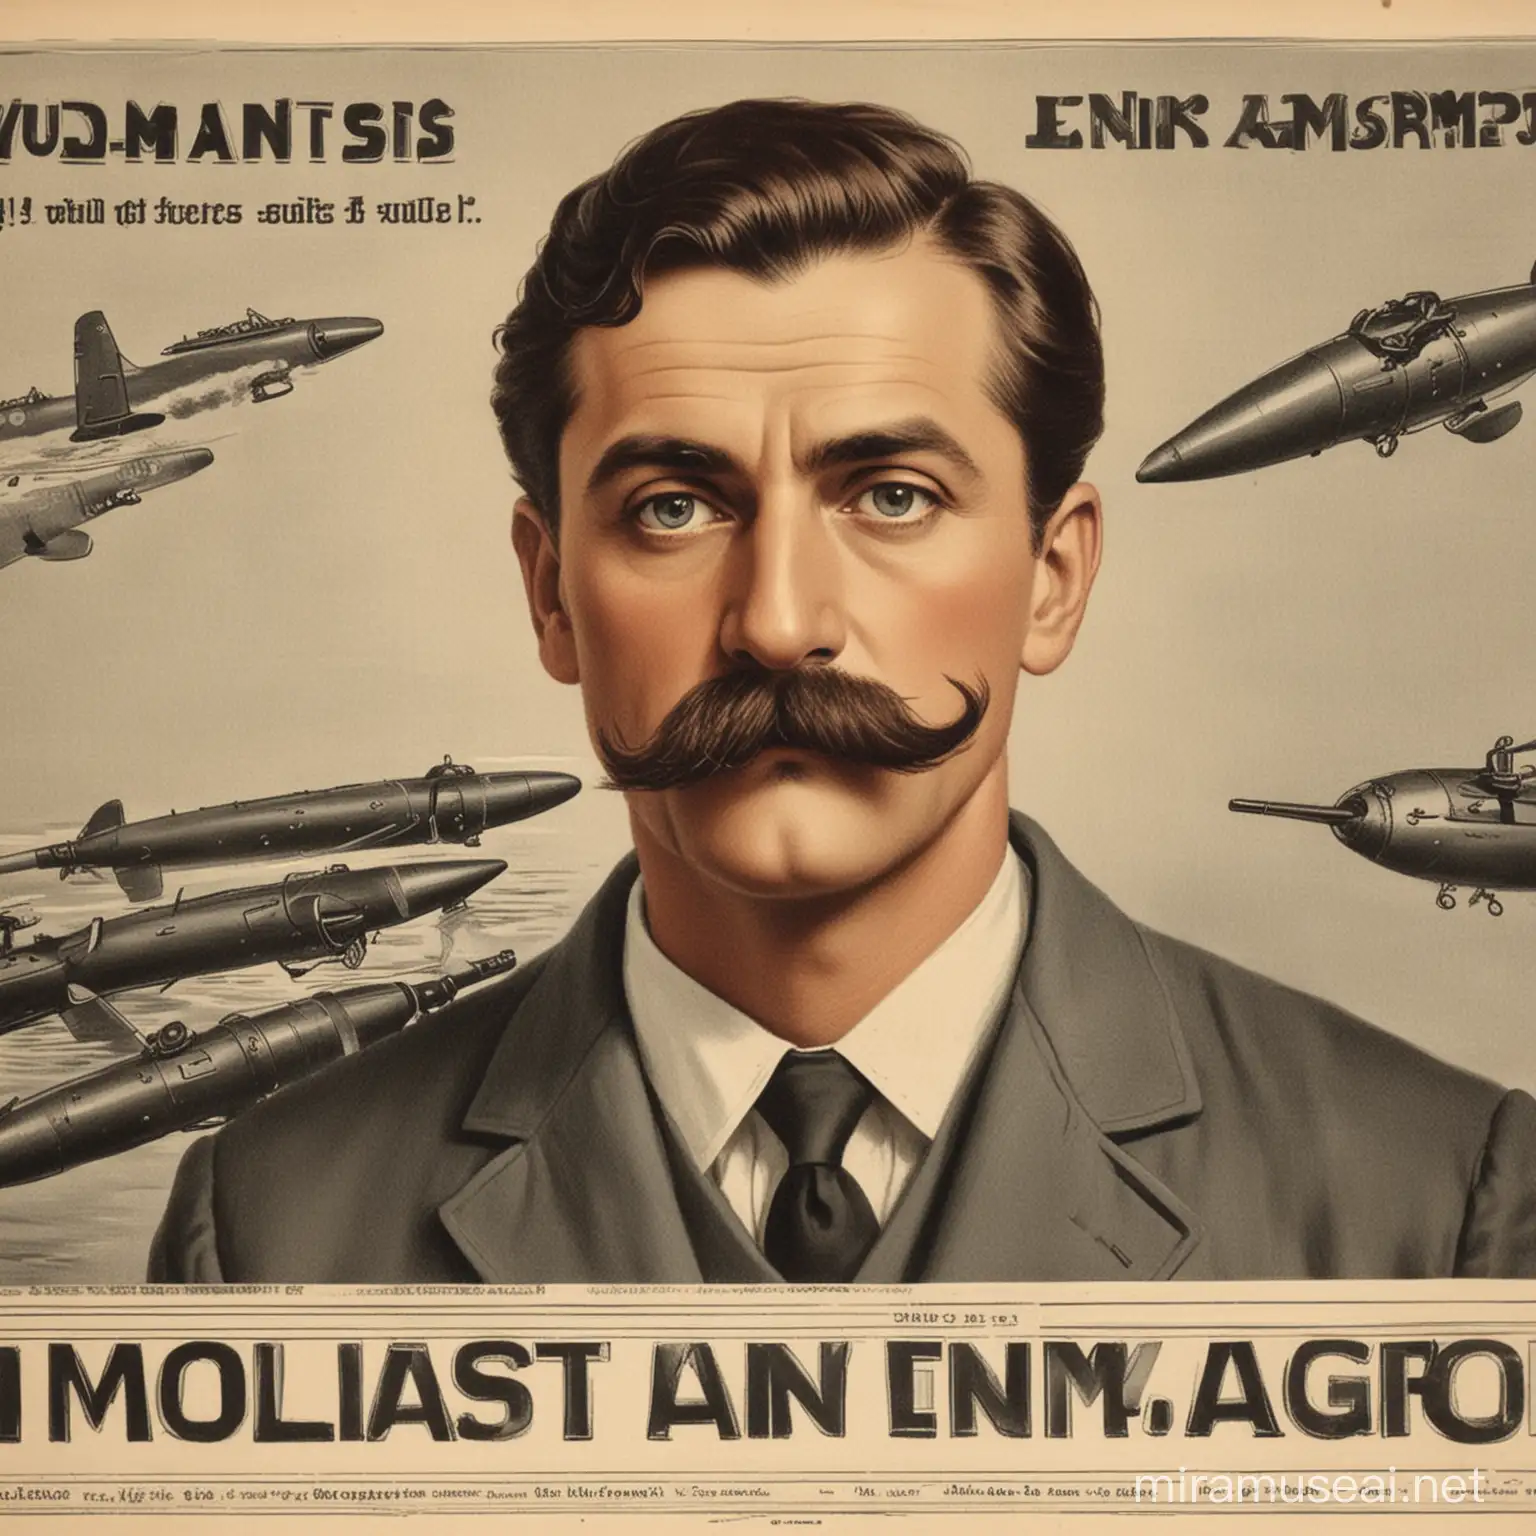 propaganda of a teacher with a moustache being clueless about torpedoes